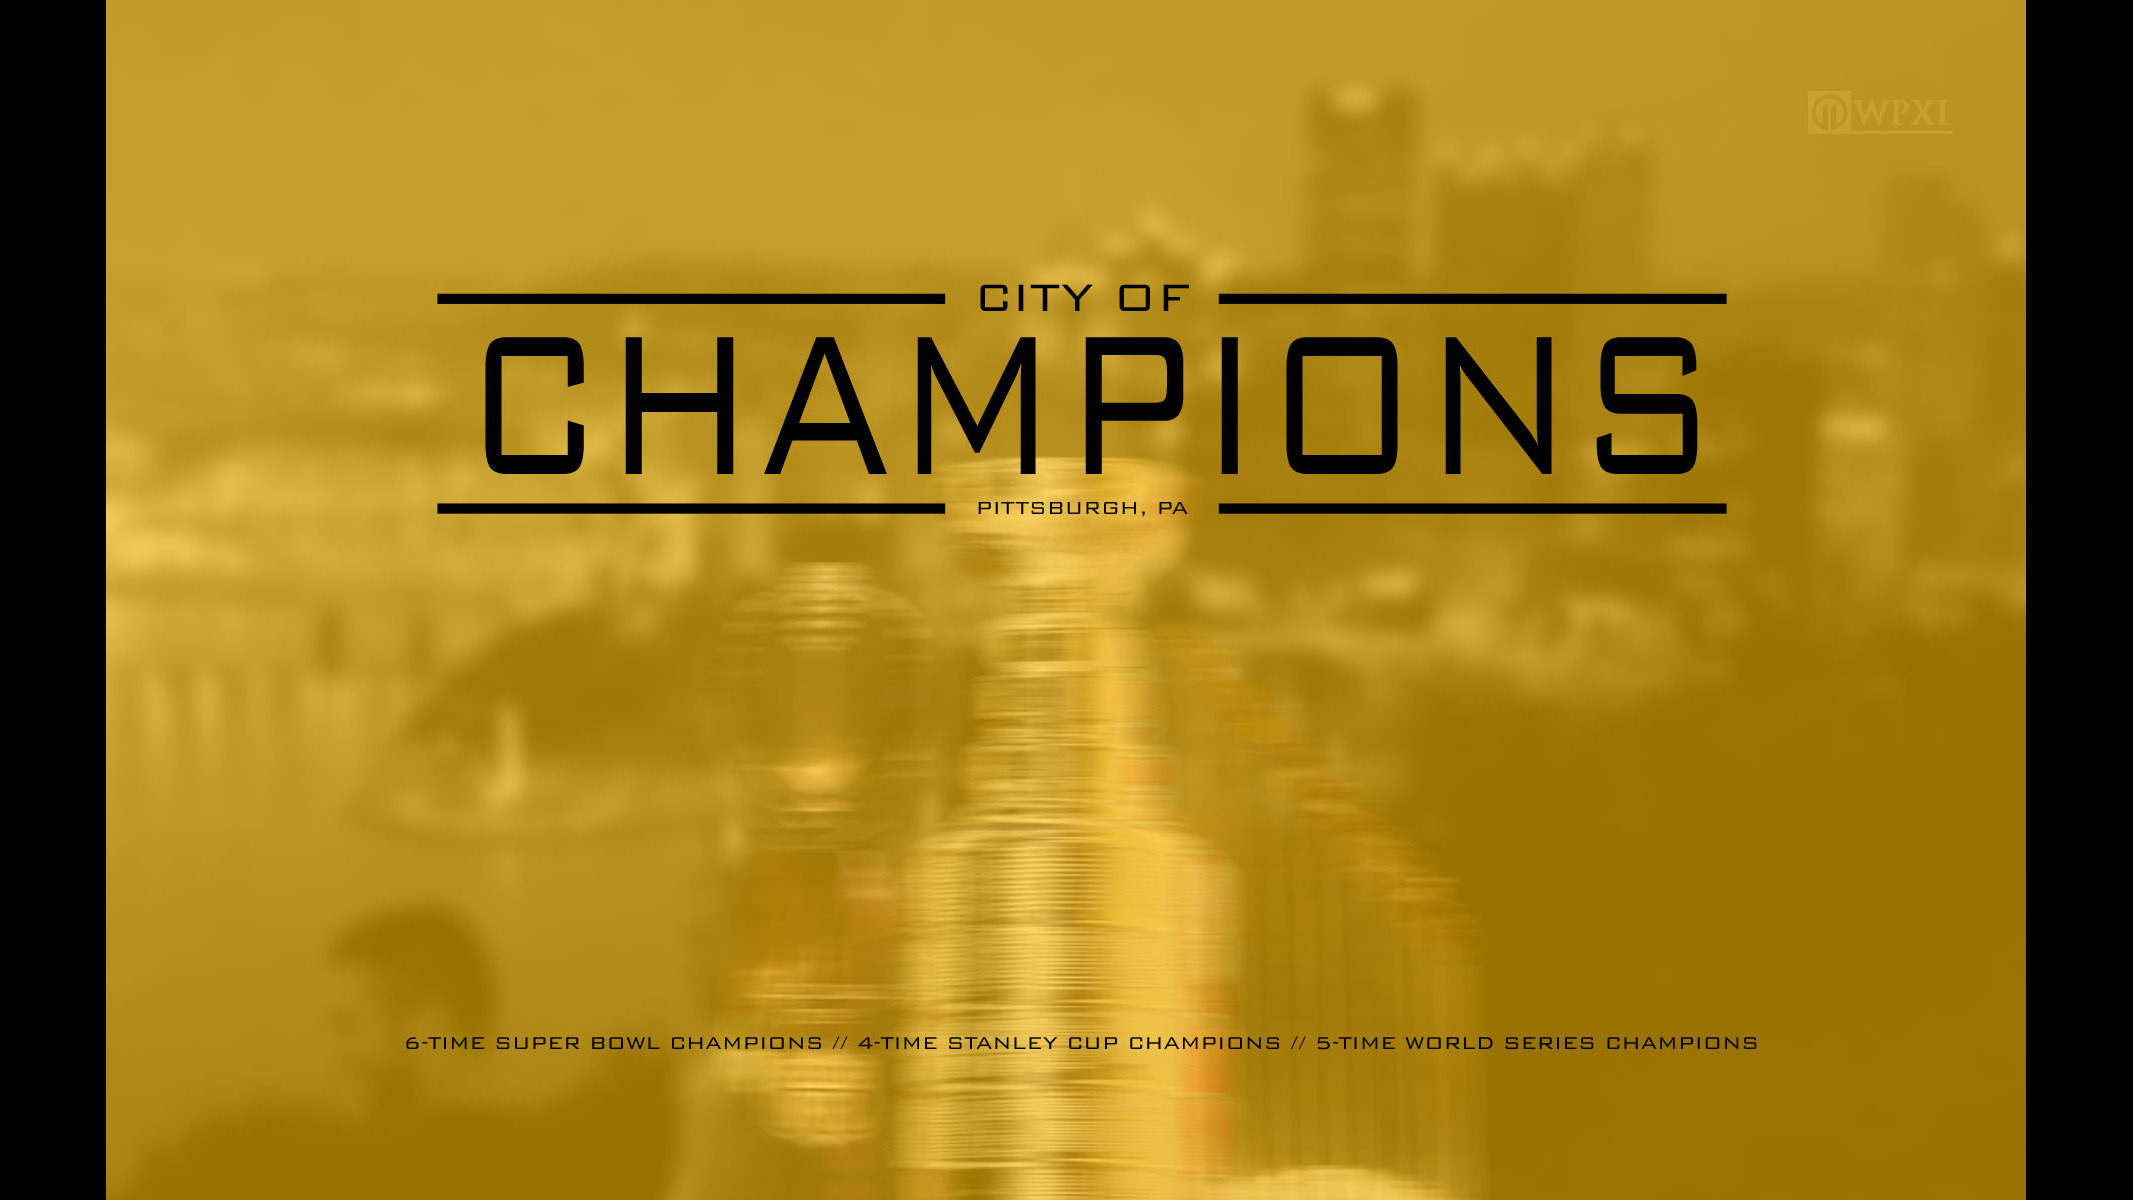 2133x1200 Show your Pittsburgh pride with CITY OF CHAMPIONS wallpaper!